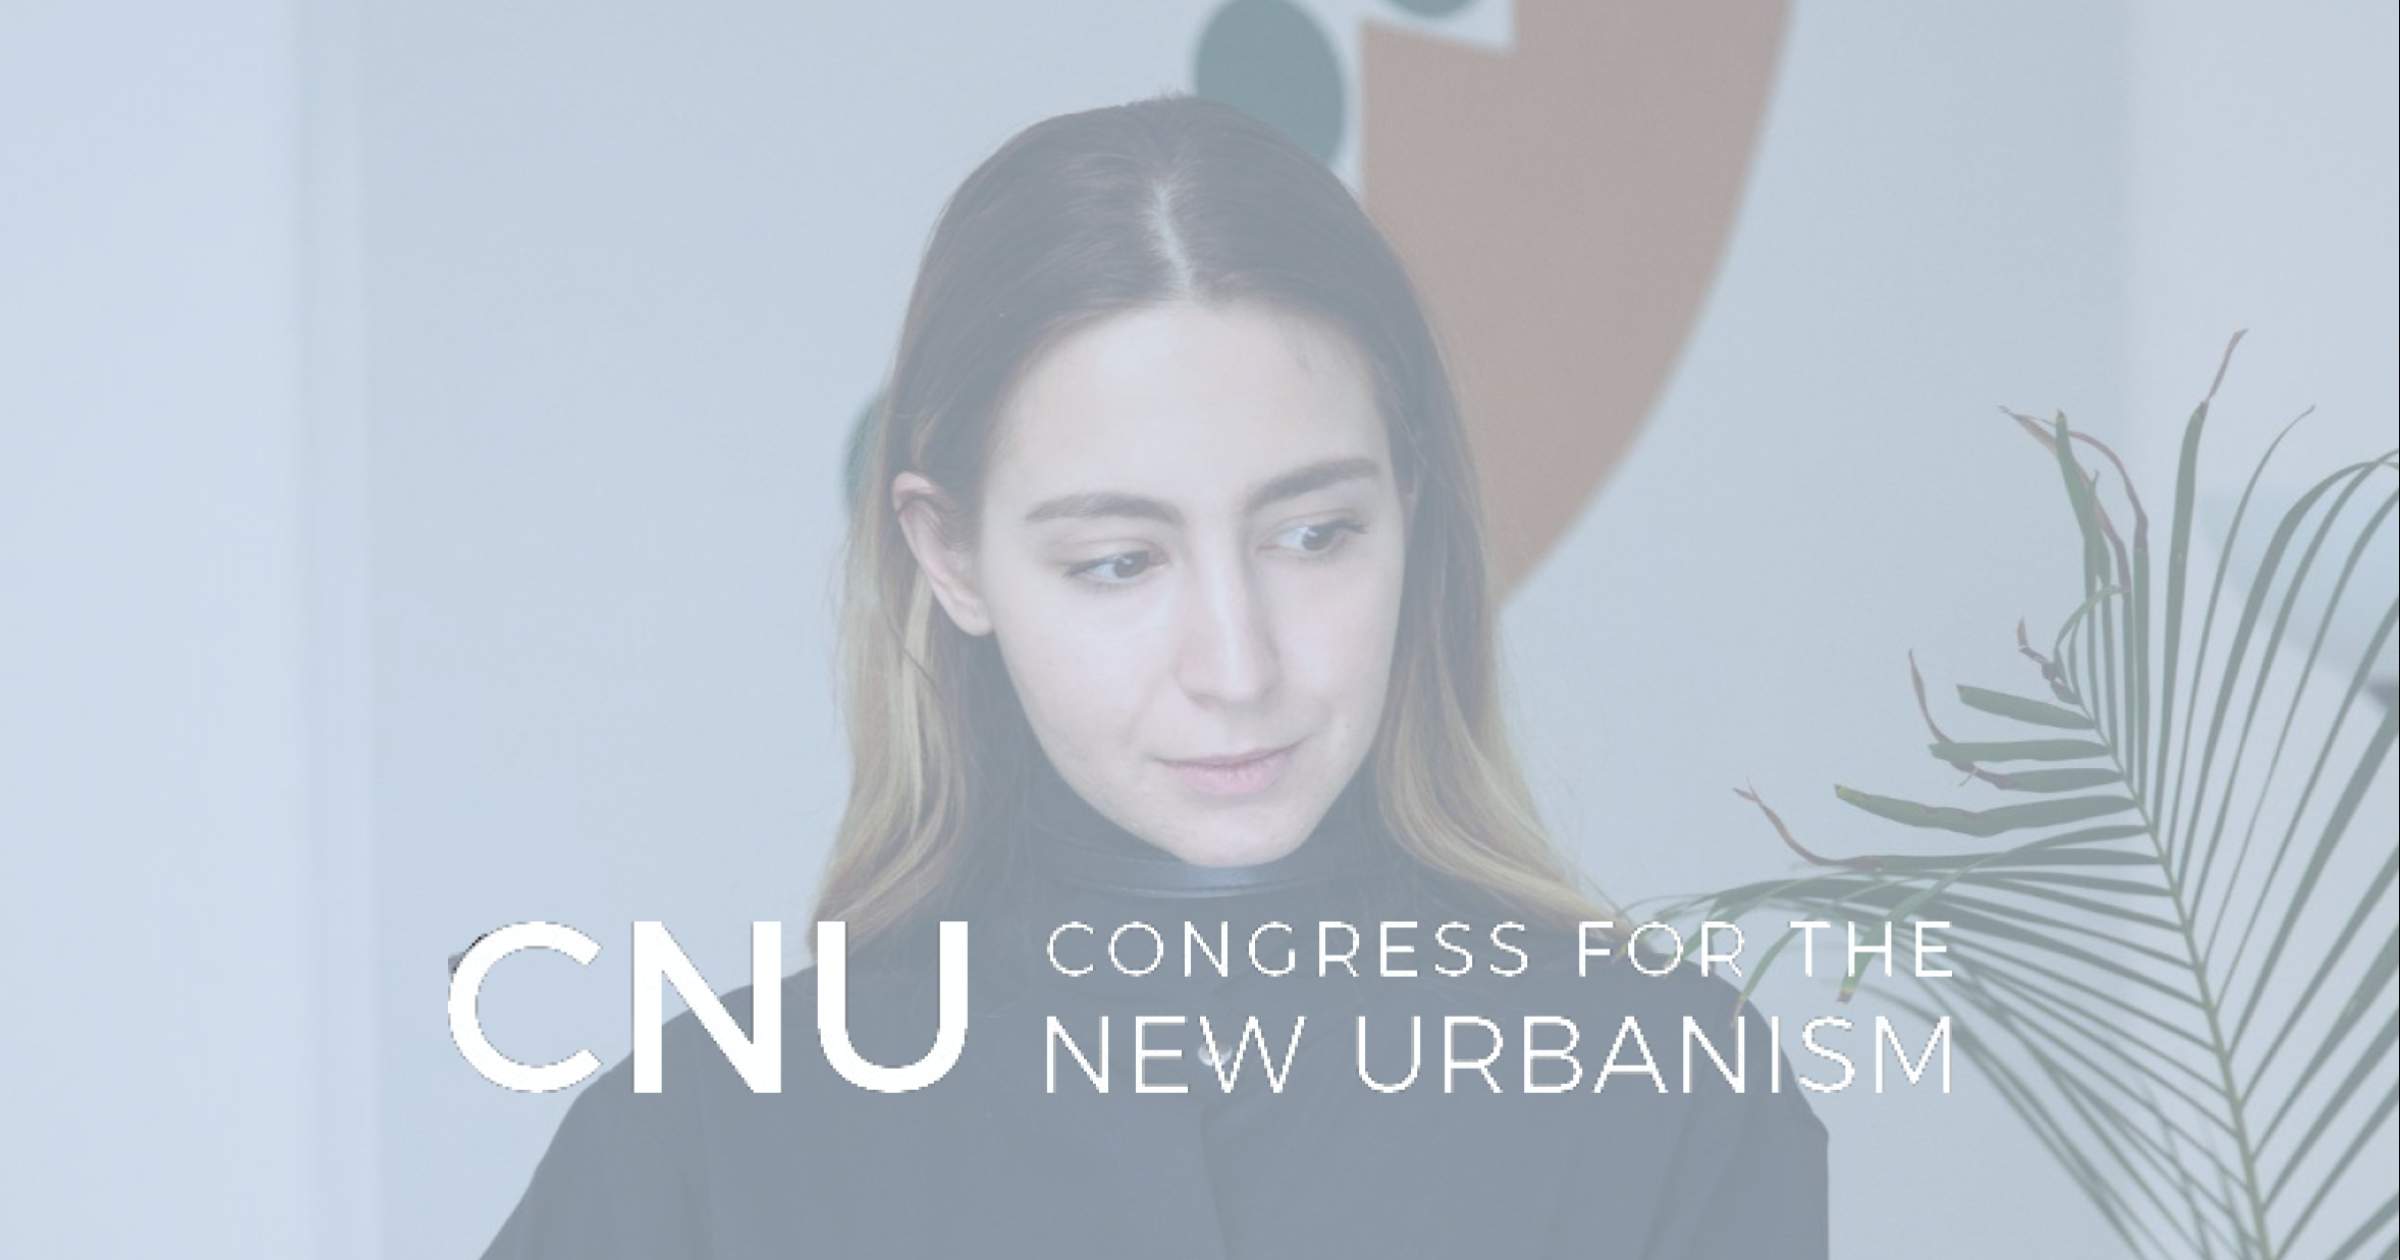 Congress for the New Urbanism